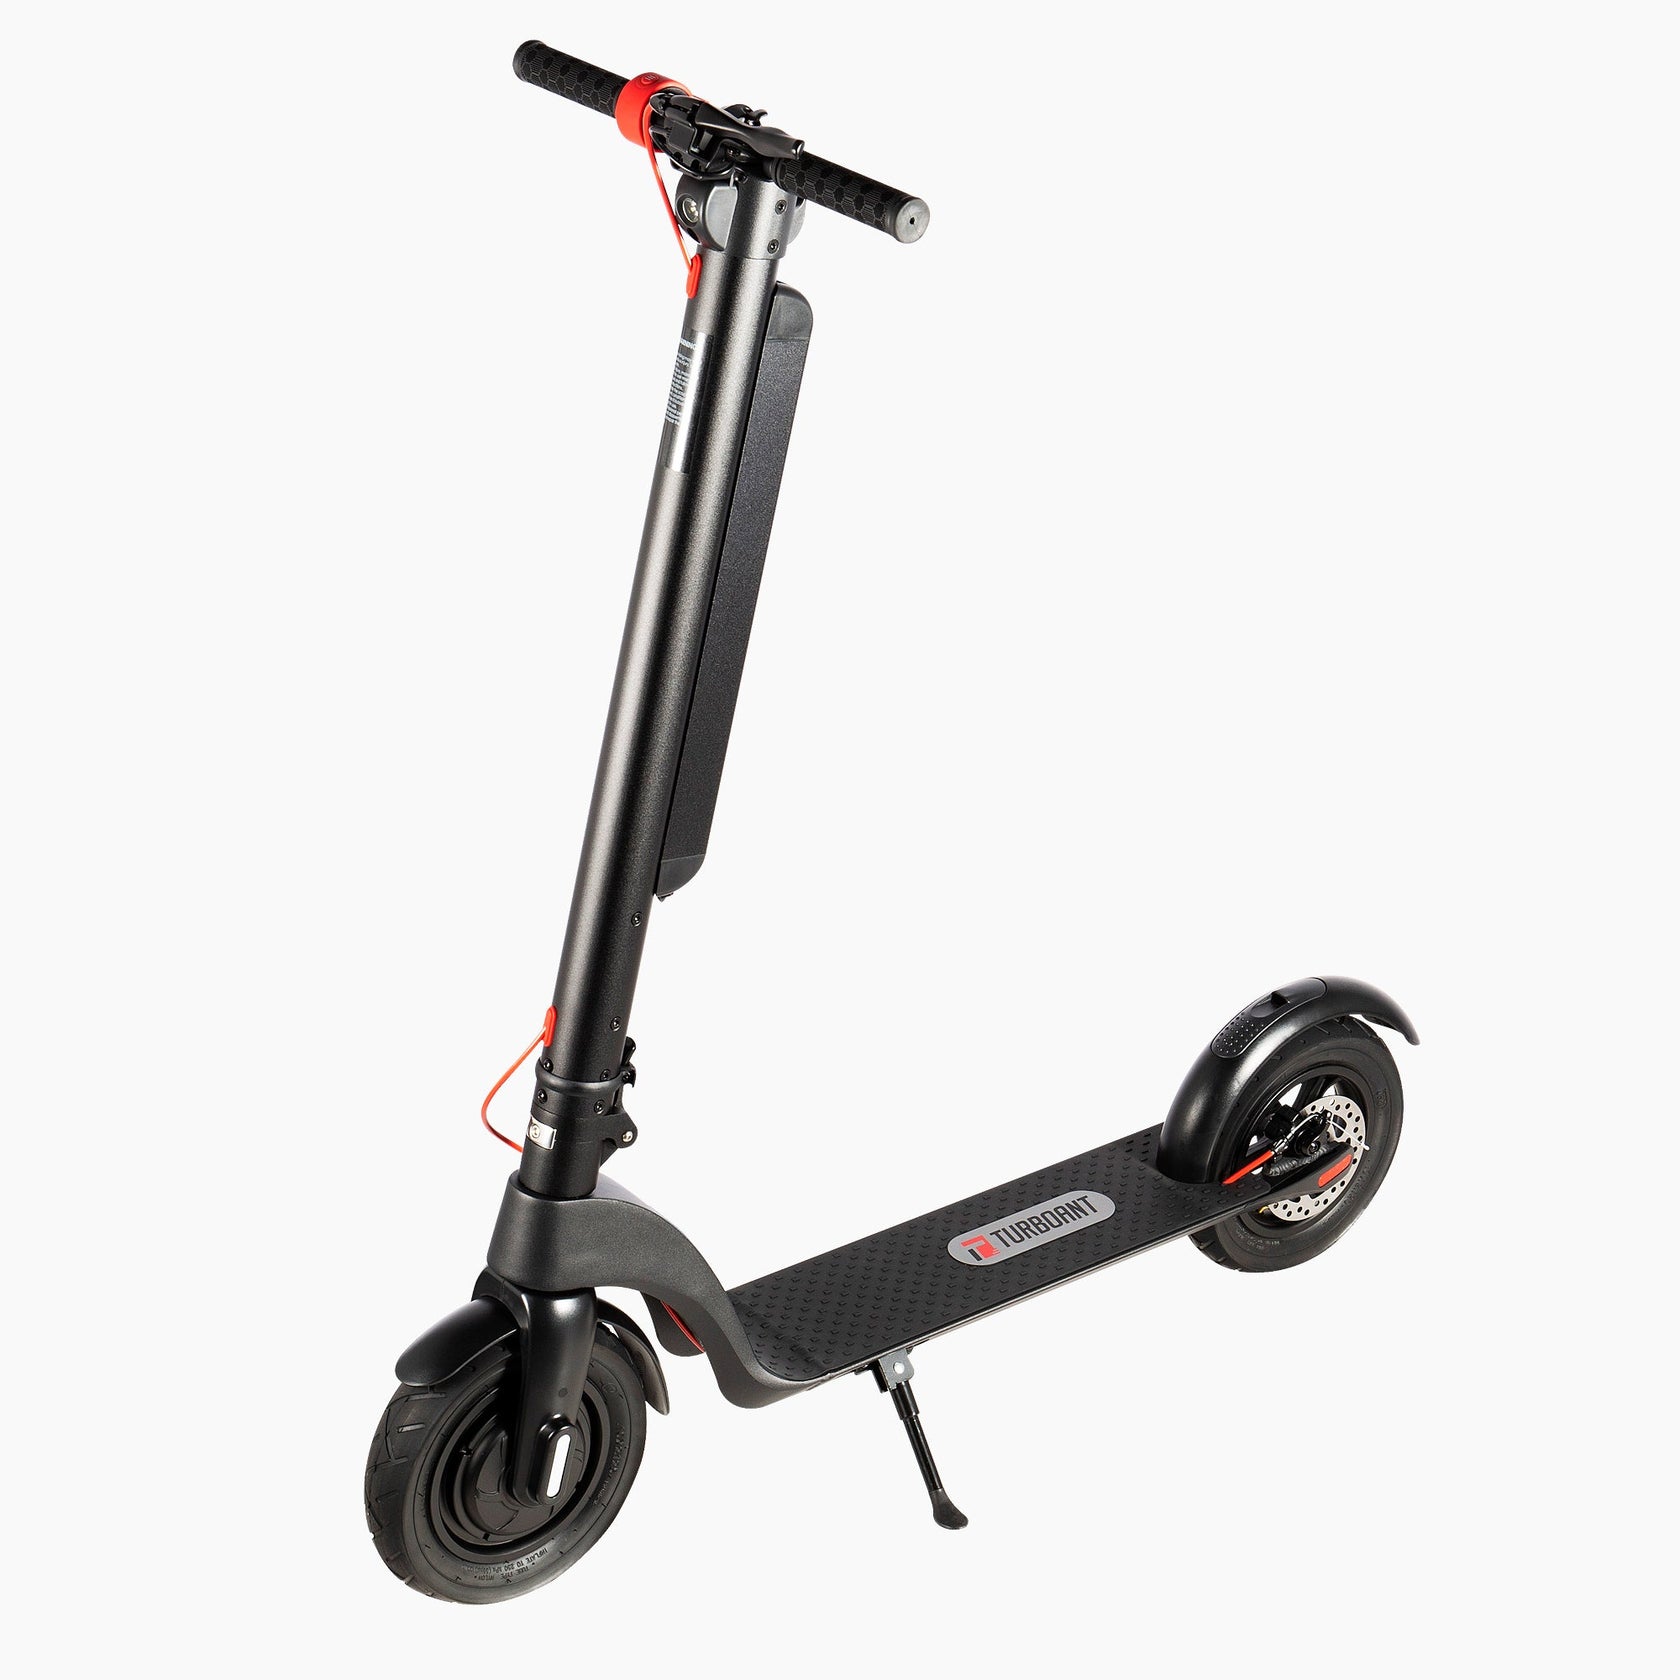 TurboAnt X7 Pro Folding Electric Scooter